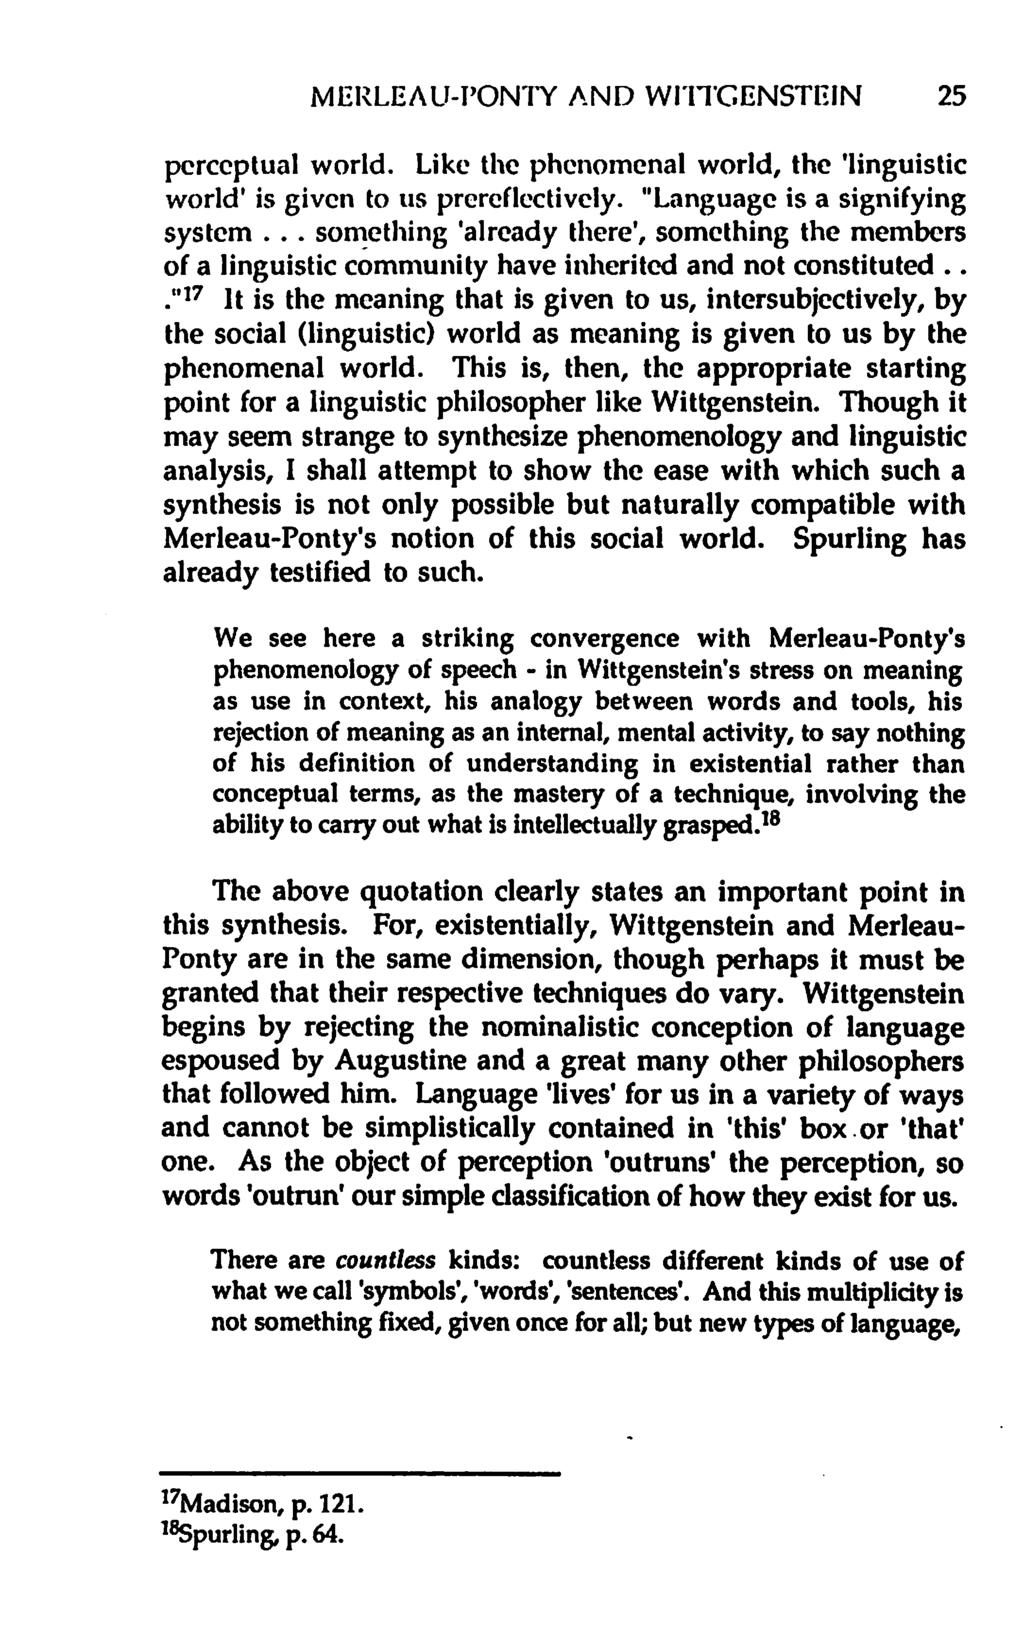 MERLEAU-PONTY AND WITTGENSTEIN 25 perceptual world. Like the phenomenal world, the 'linguistic world' is given to us prereflectively. "Language is a signifying system.